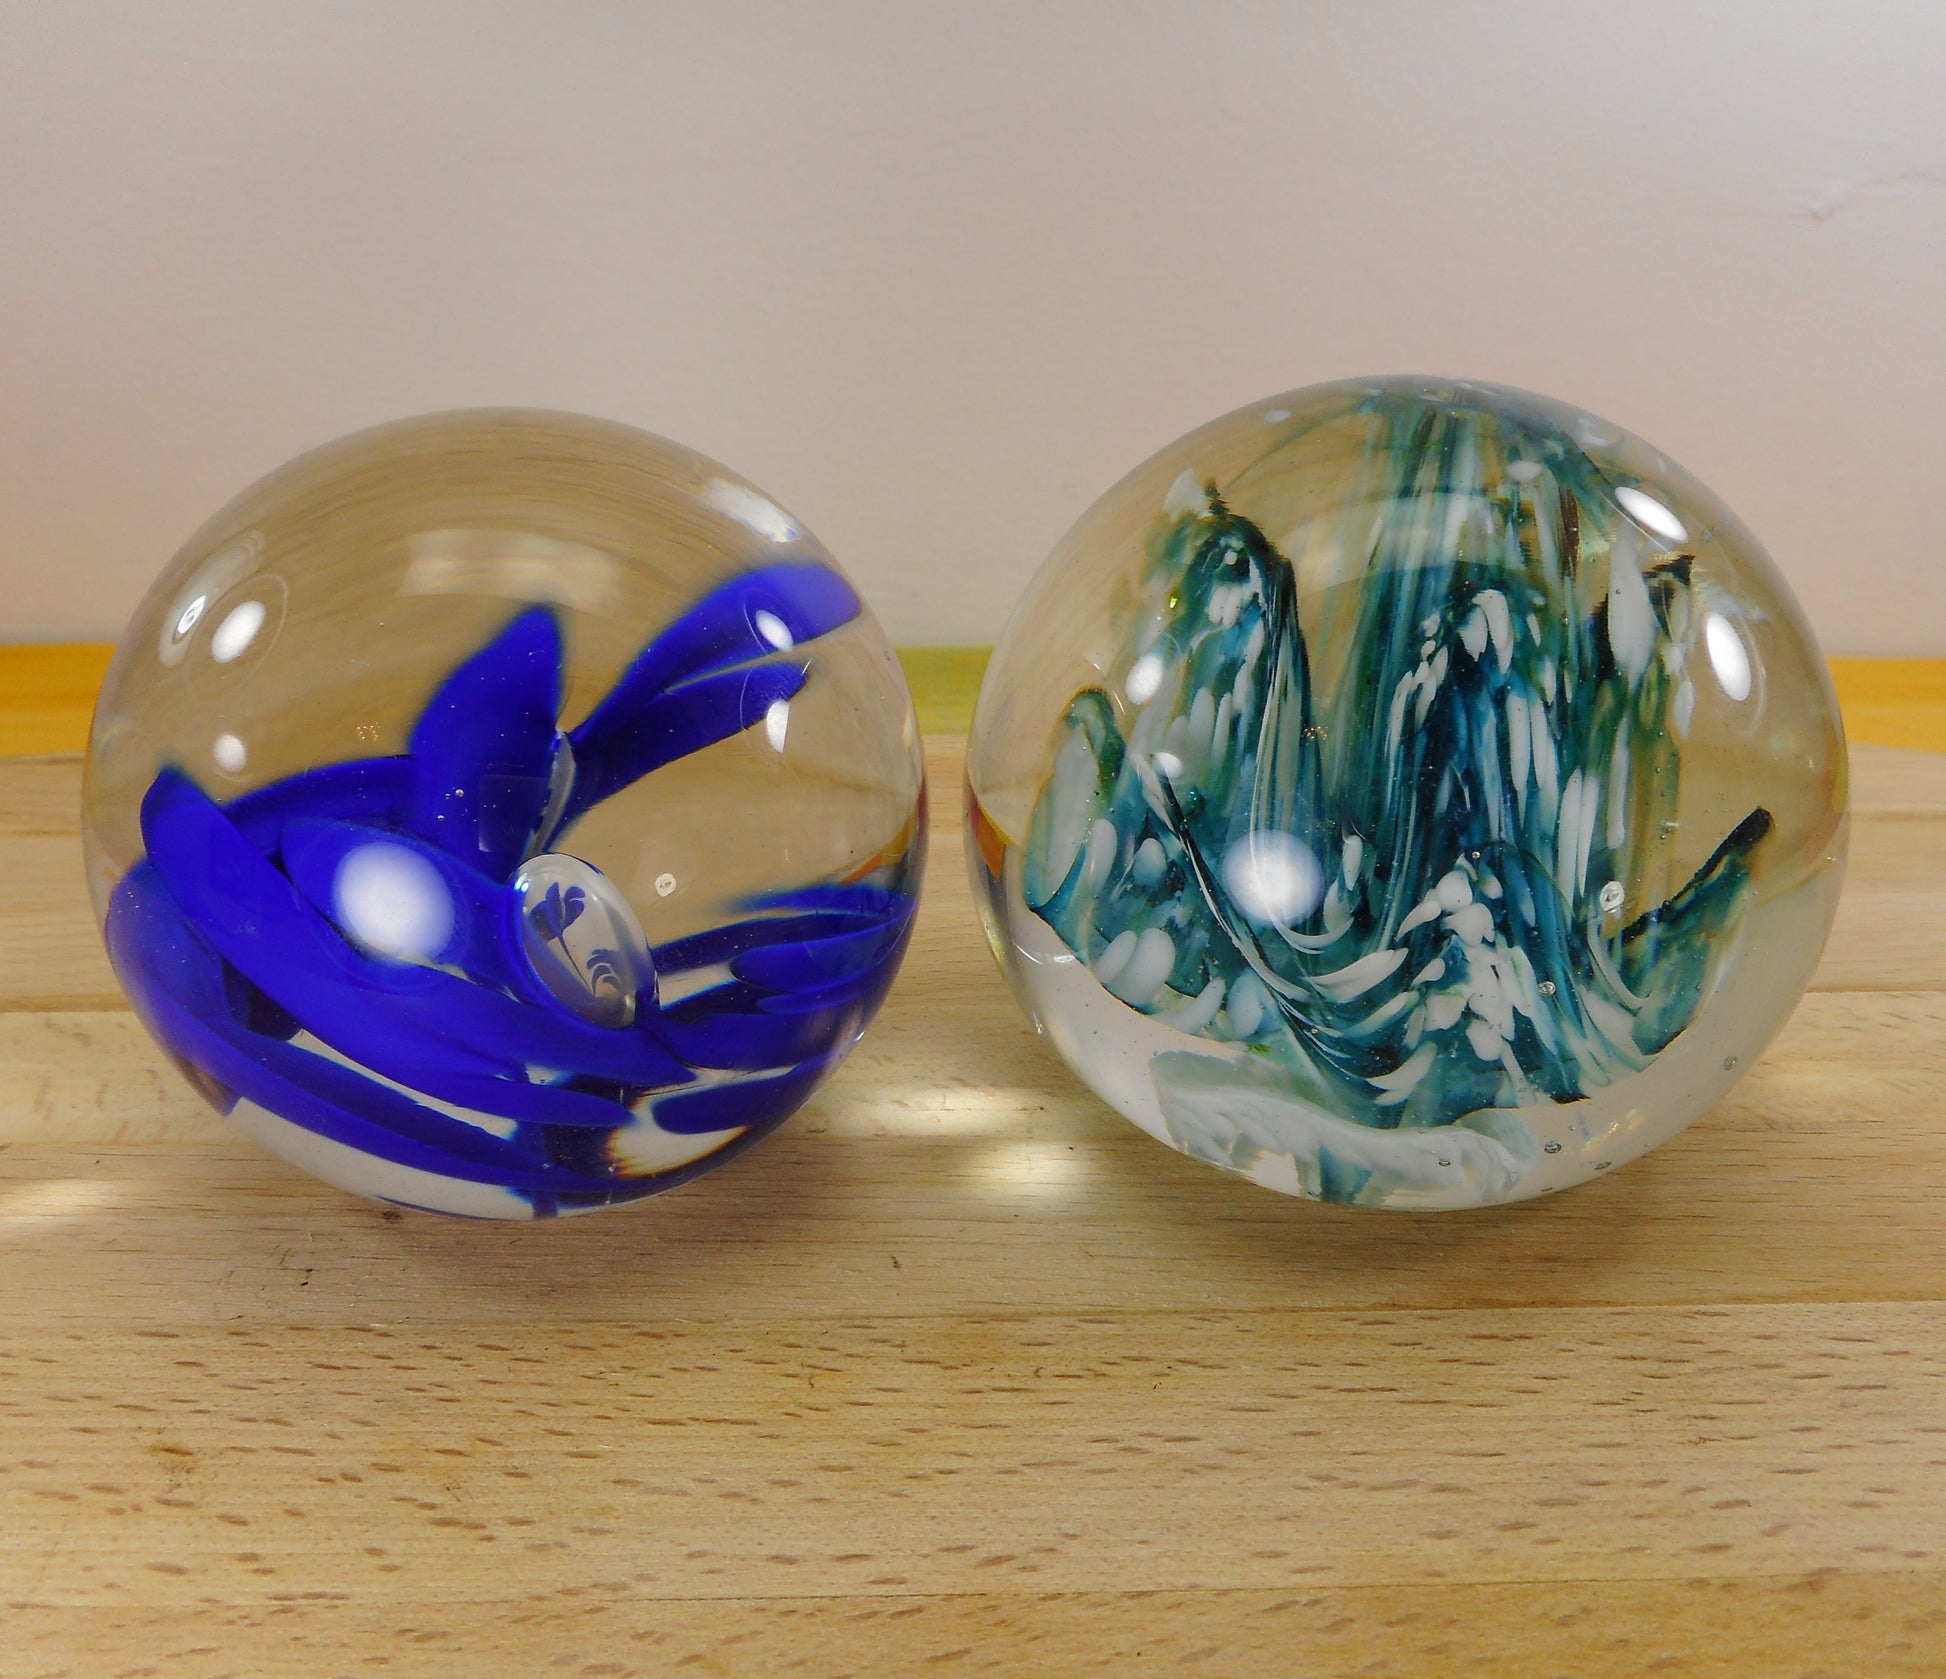  S. Wilkerson Pair 1981 Signed Art Glass Paperweights Blue Teal